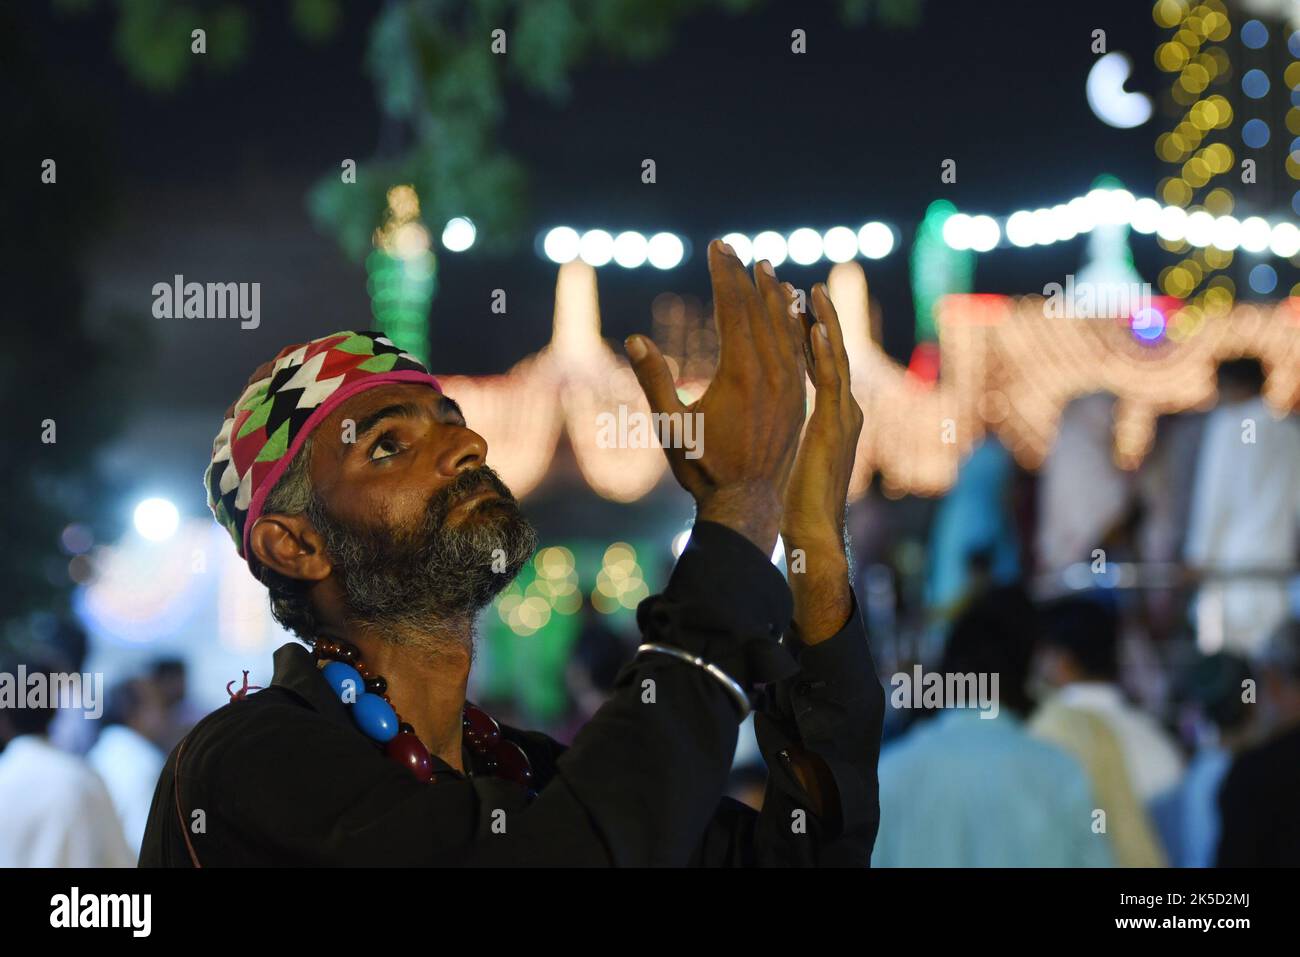 Pakistani Muslim devotees (Malang) take part in 399th URS birth anniversary celebrations on the second day at the shrine of famous fifteenth-century Sufi Saint Hazrat Mir Mohammed Muayyinul in Lahore, Pakistan on Oct. 5, 2022. Thousands of people across the country visit the shrine to pay tribute to him during a three-day festival. The saint was equally popular among the Muslim and Sikh religions, as Mian Mir went to Amritsar (India) in December 1588 to lay the foundation stone of Sikhs holiest site, the Golden Temple, which is commonly known as Sri Harminder Sahib. (Photo by Rana Sajid Hussai Stock Photo